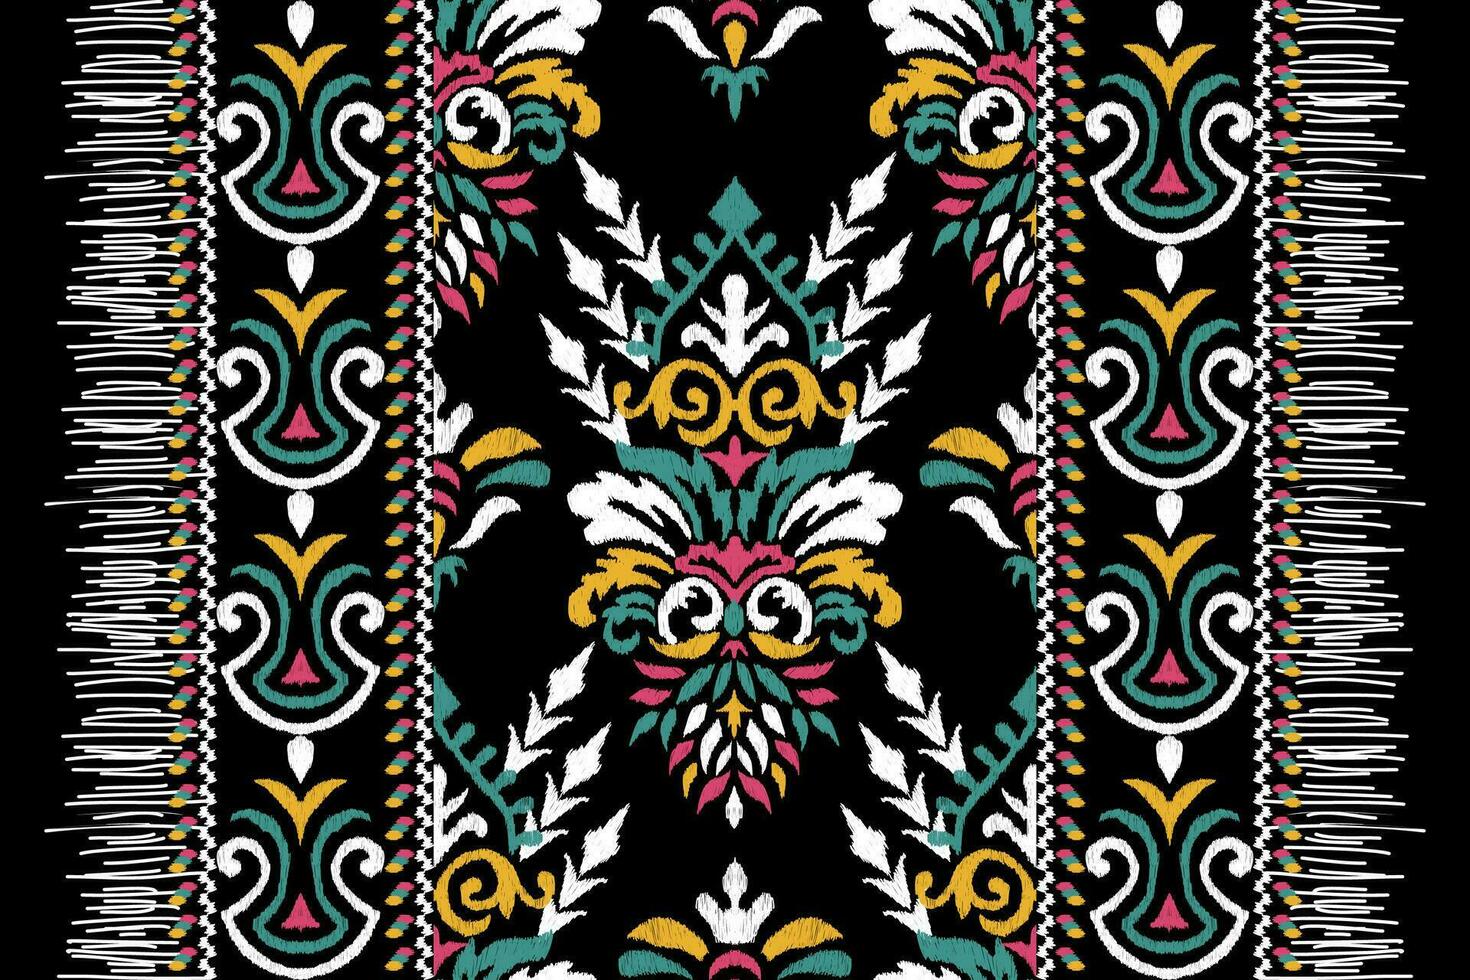 Ikat floral paisley embroidery on black background.Ikat ethnic oriental pattern traditional.Aztec style abstract vector illustration.design for texture,fabric,clothing,wrapping,decoration,scarf,carpet